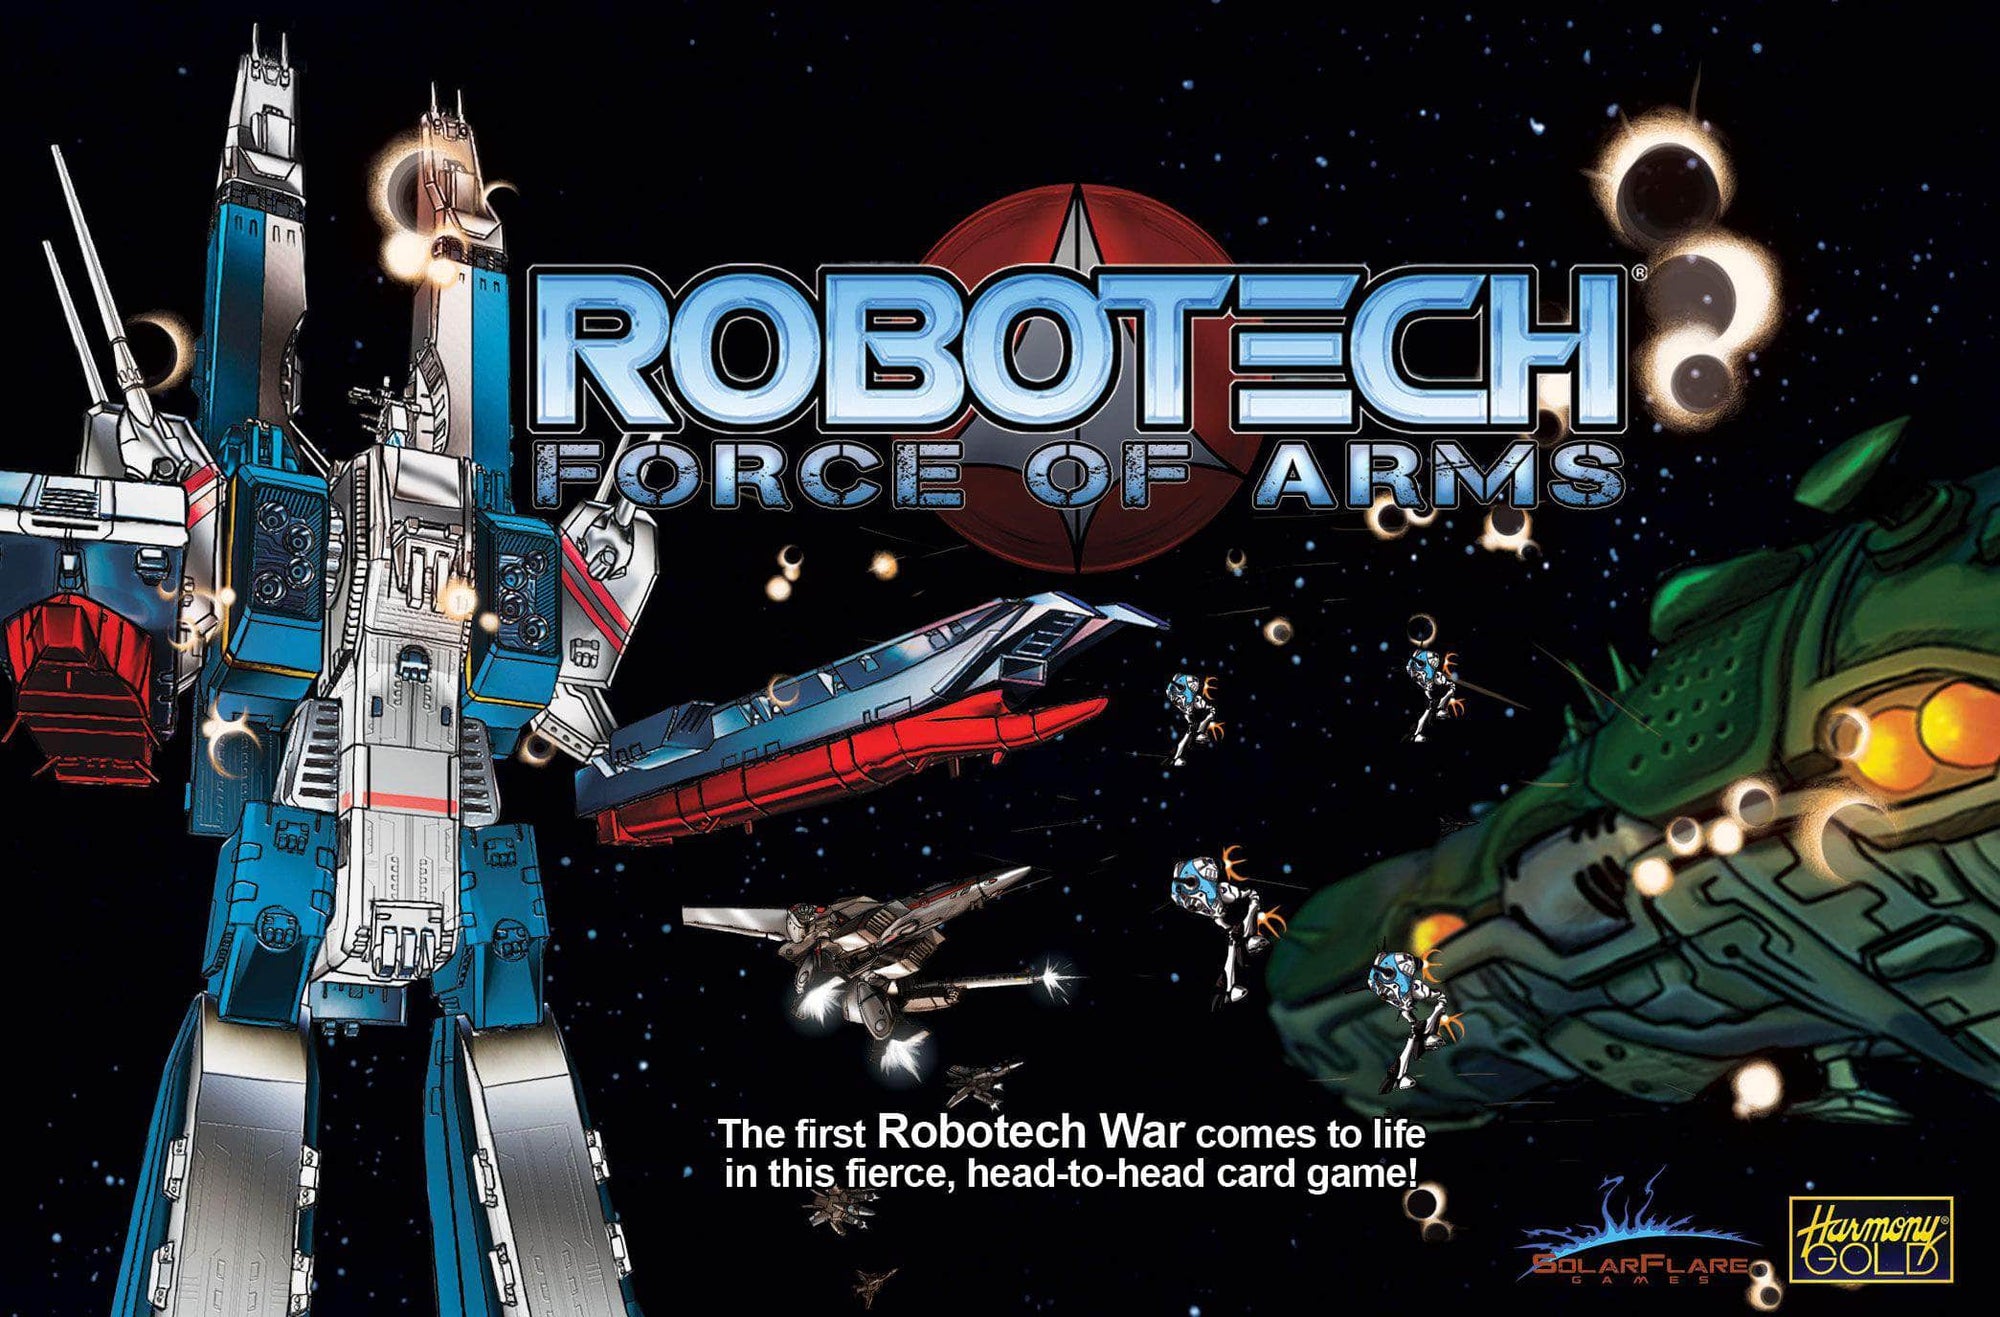 Robotech: Force of Arms (Retail Edition) Retail Board Game Solar Flare Games 0860420001700 KS800724A